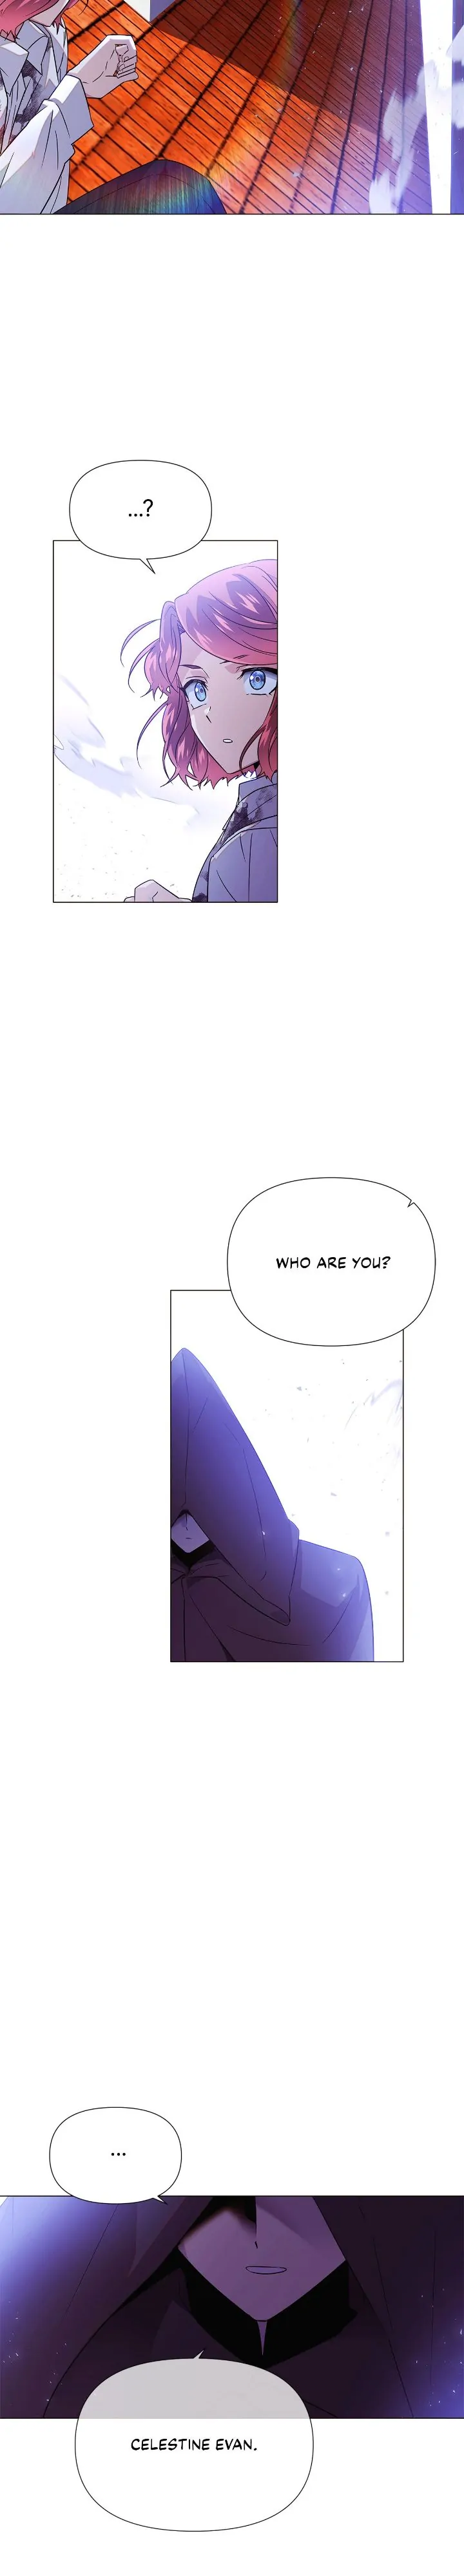 The Villain Discovered My Identity - Chapter 124 Page 16